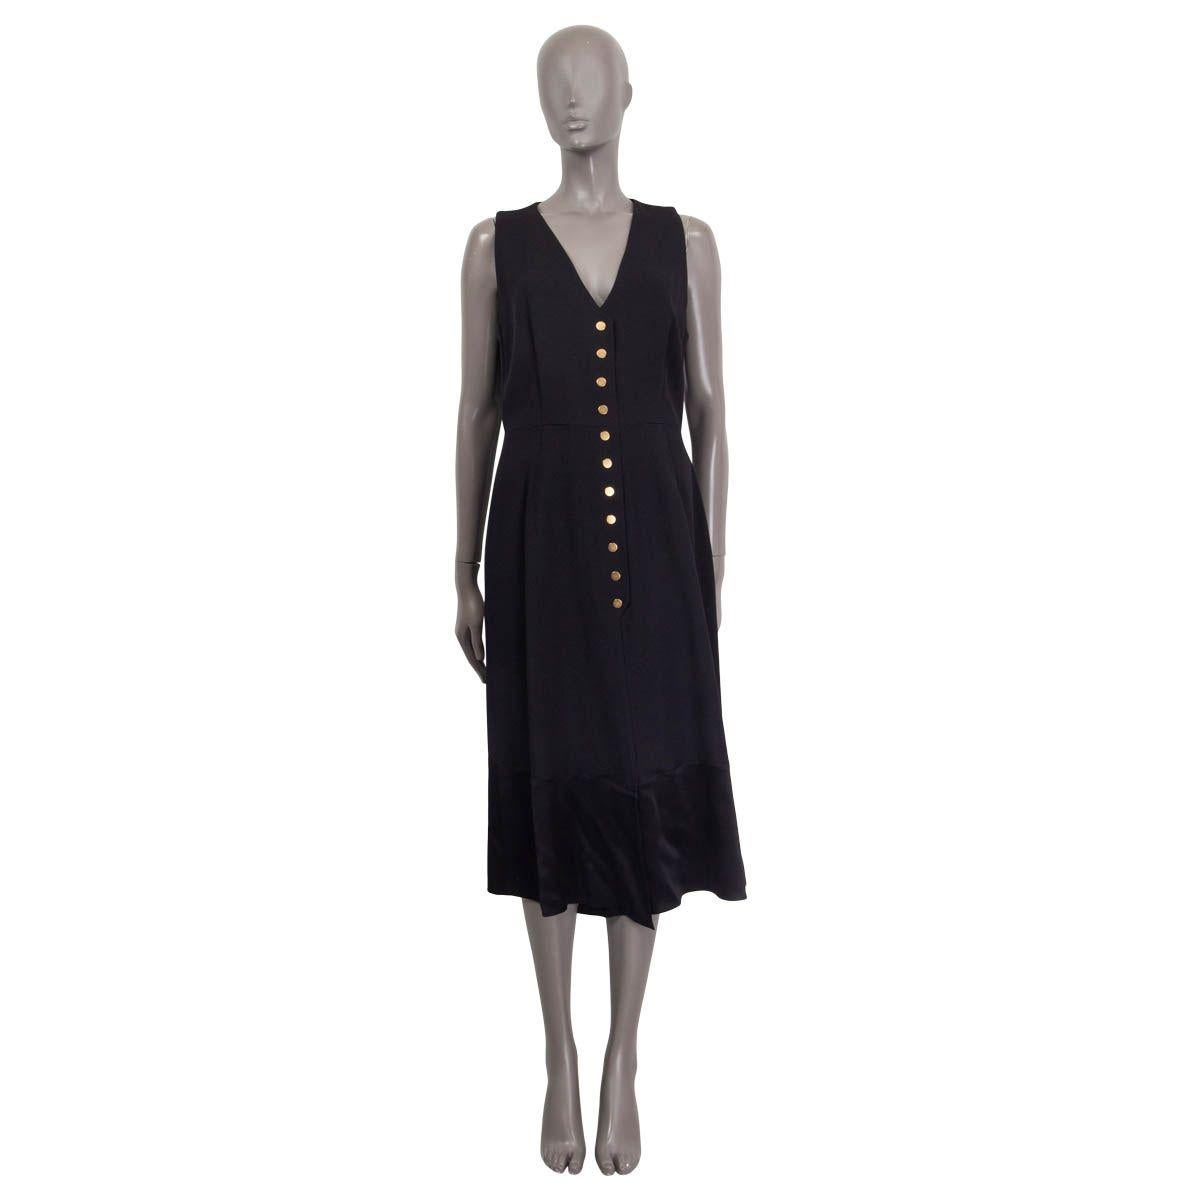 100% authentic Derek Lam asymmetrical midi dress in black acetate (53%) and viscose (47%). Features a black silk (100%) hemline and a deep v-neck. Opens with a concealed zipper and a hook on the back. Lined in black silk (100%). Has been worn and is